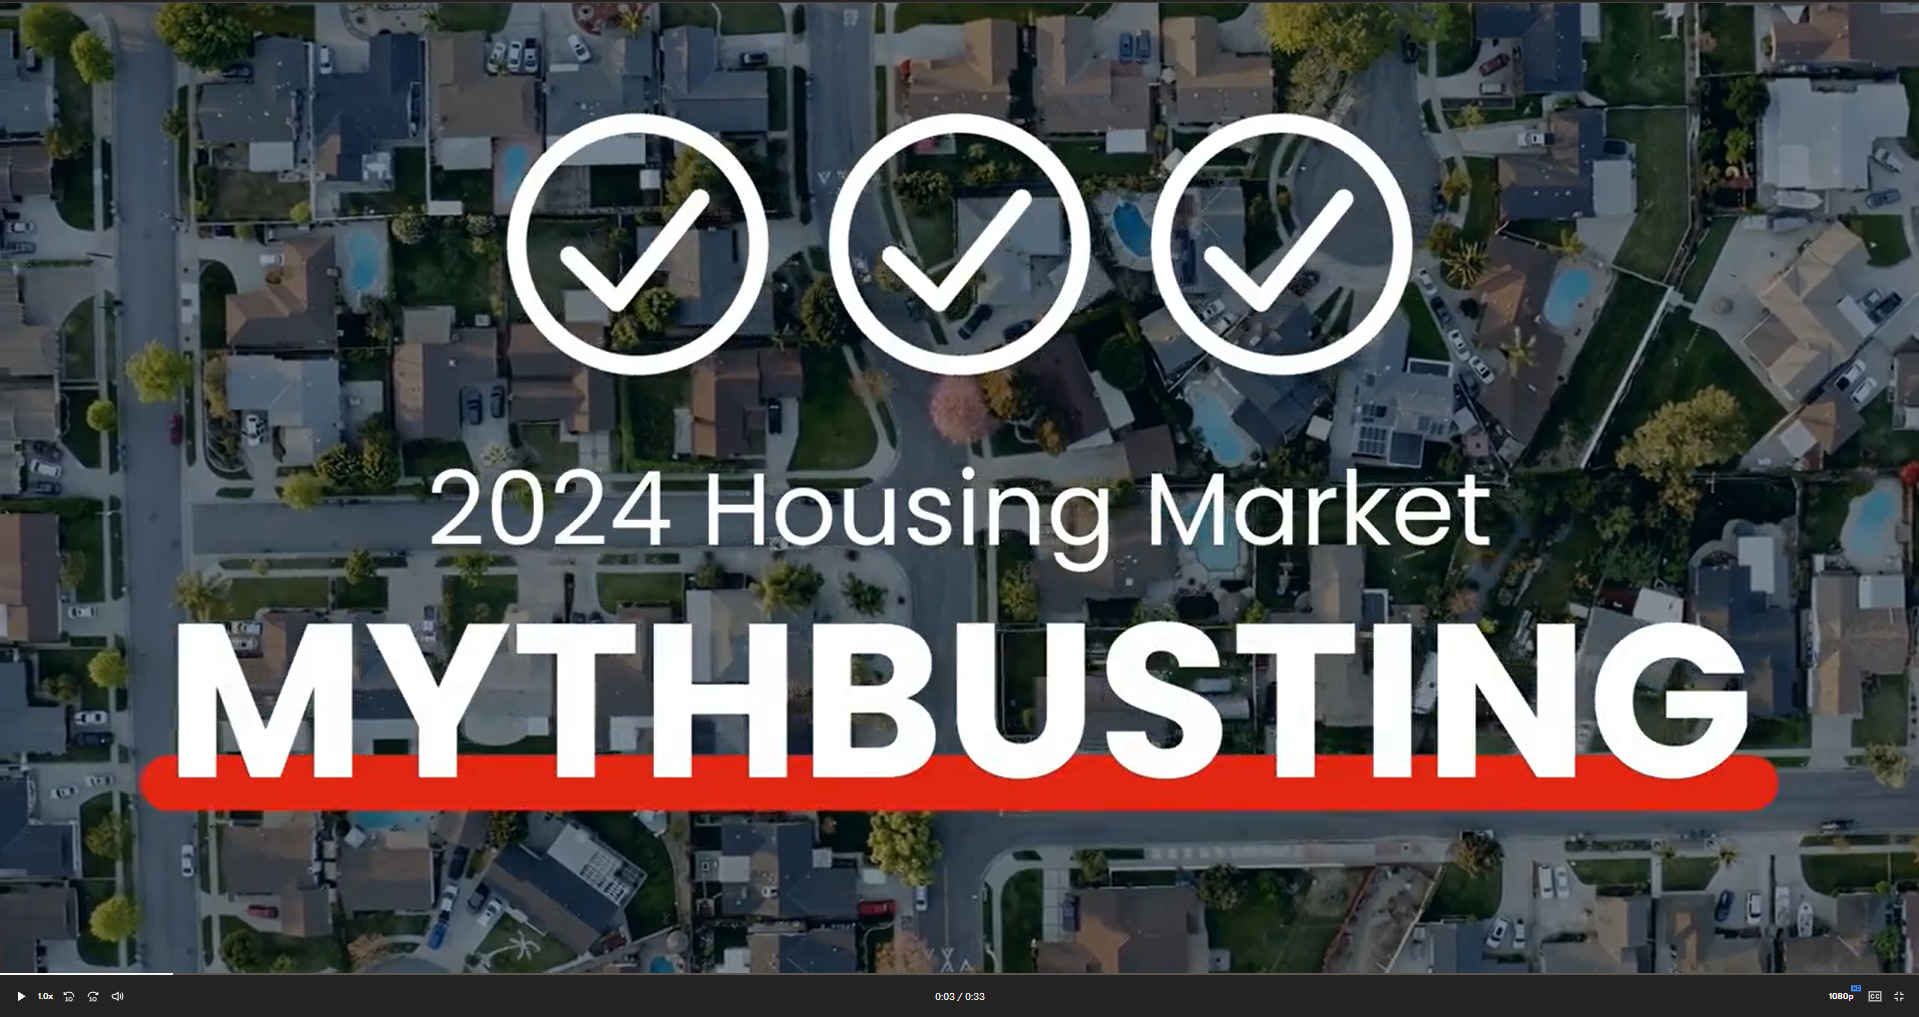 2024 Real Estate Mythbusting for Jean-Luc Andriot blog 042624